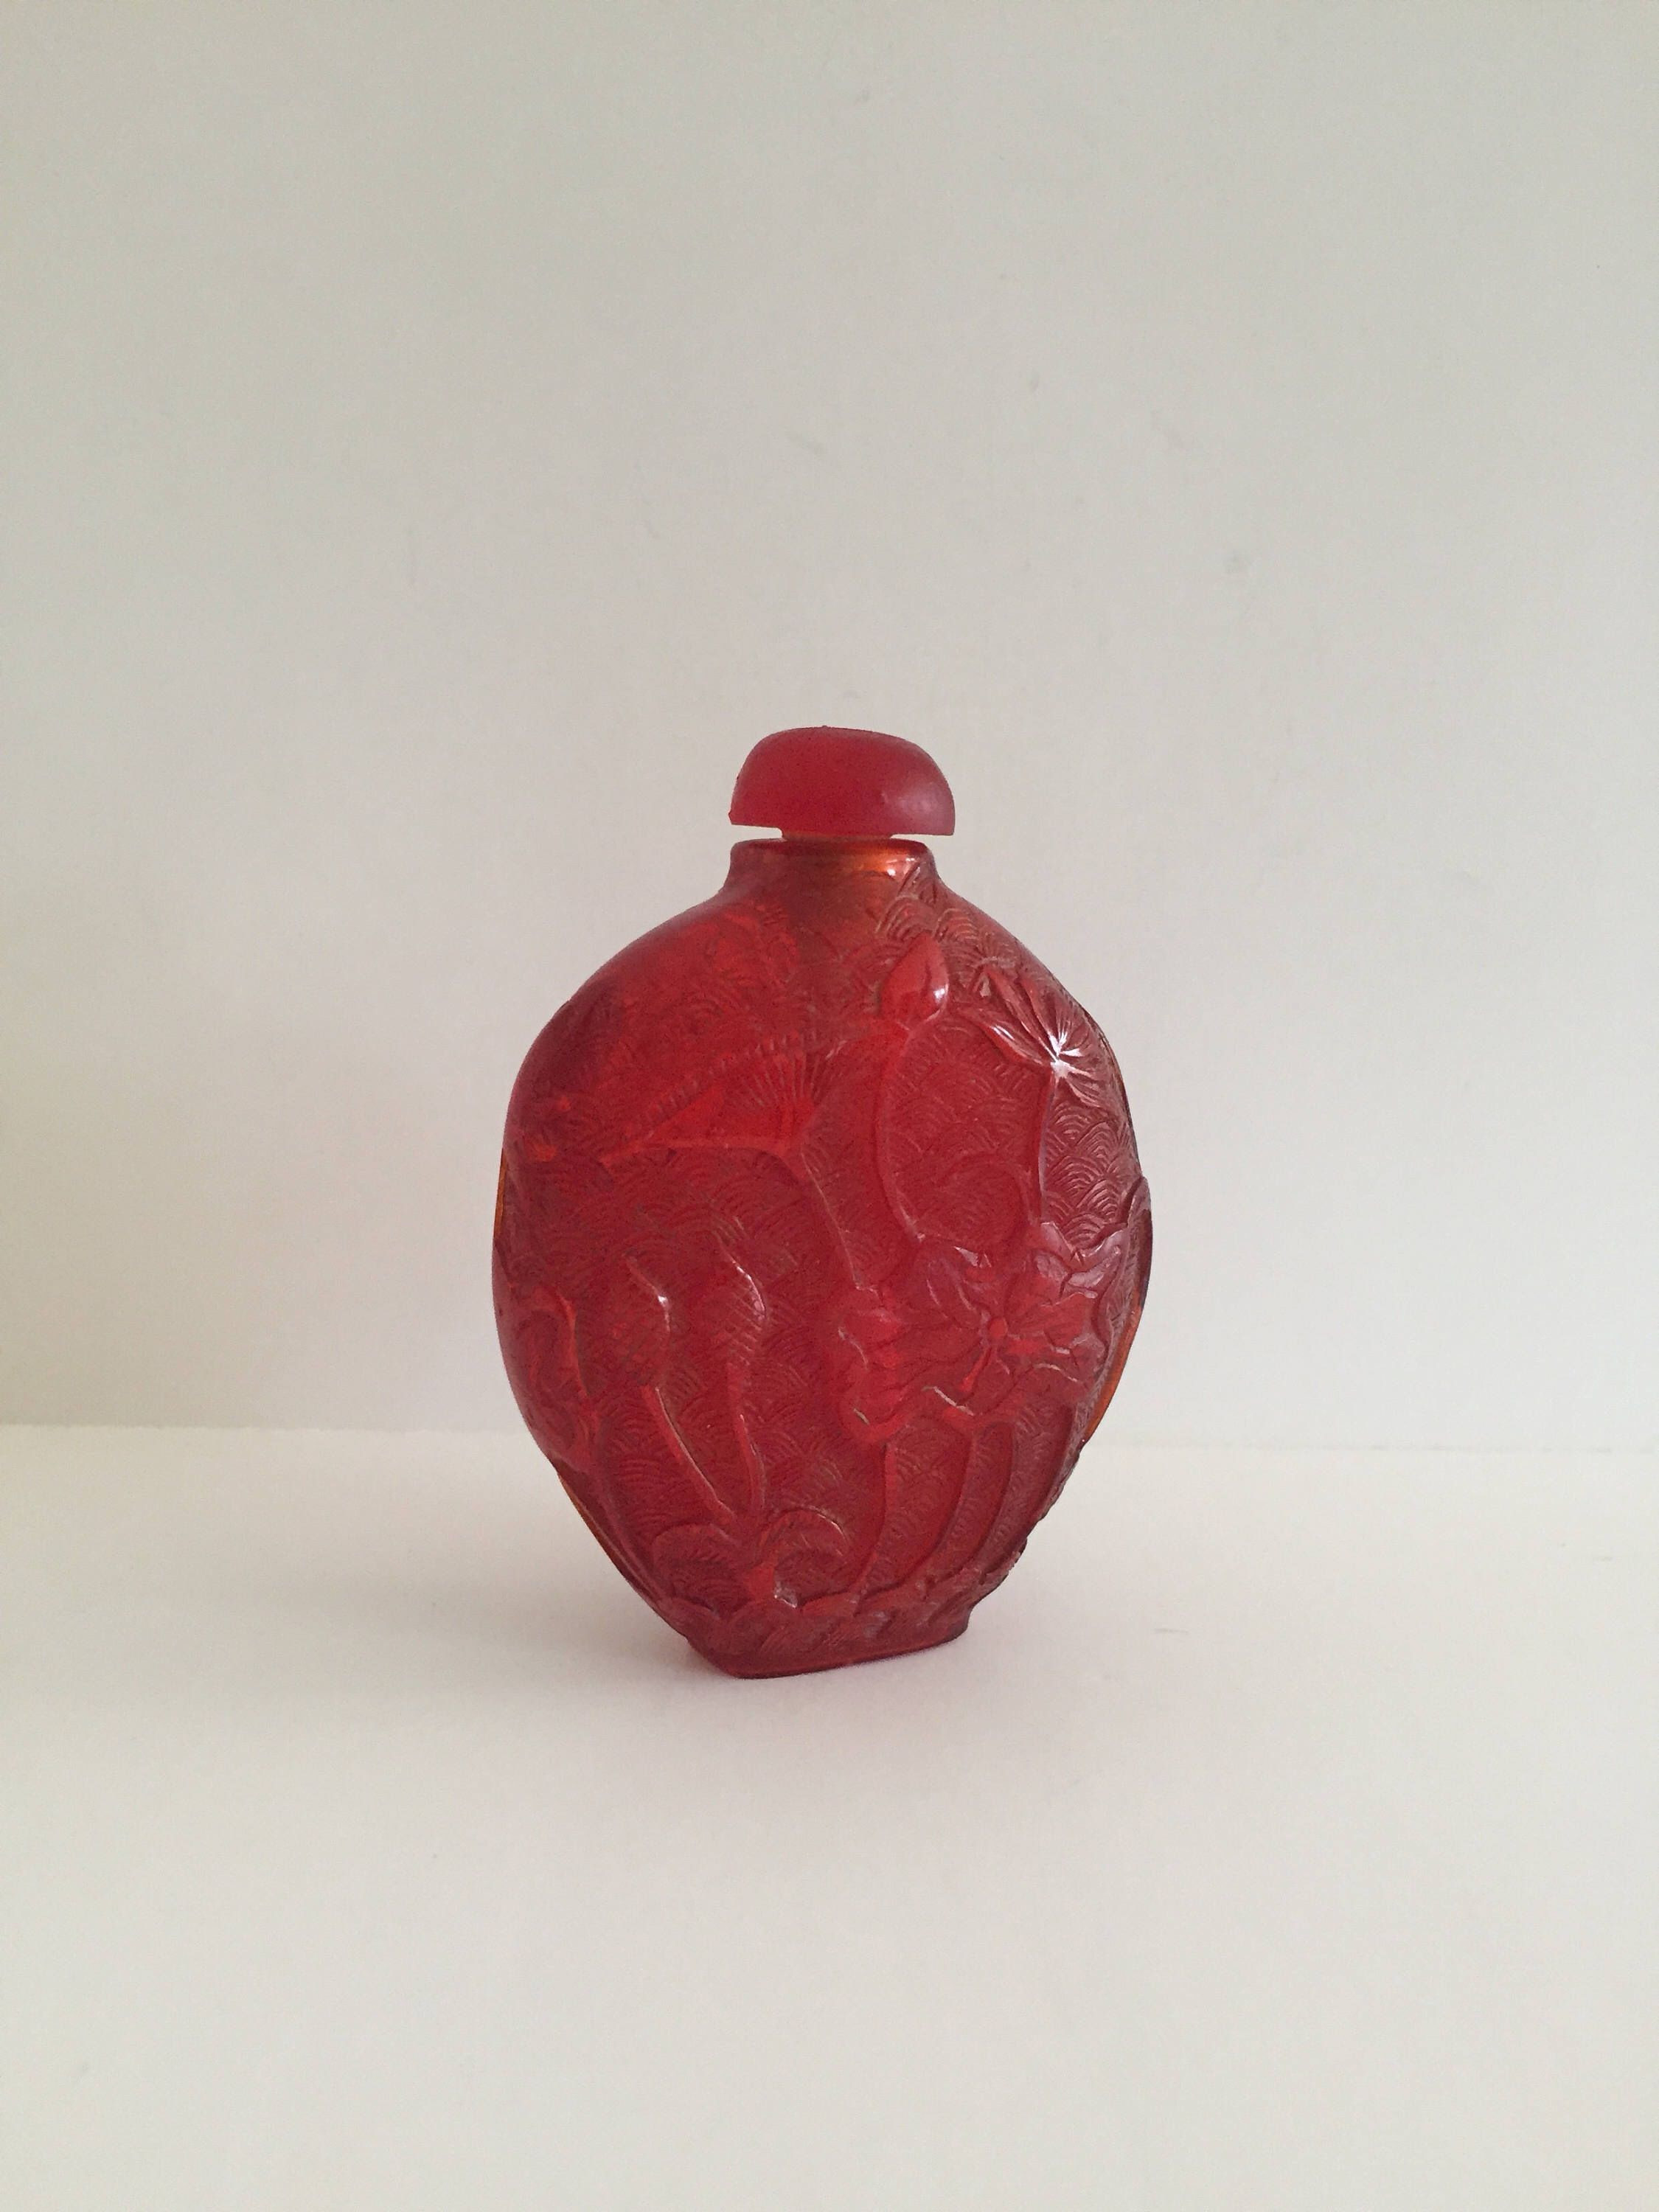 15 Stylish Buy Red Glass Vase 2024 free download buy red glass vase of antique ruby red glass opium snuff bottleminiature chinese art within antique ruby red glass opium snuff bottleminiature chinese artasian decanter vaseintricate carved 